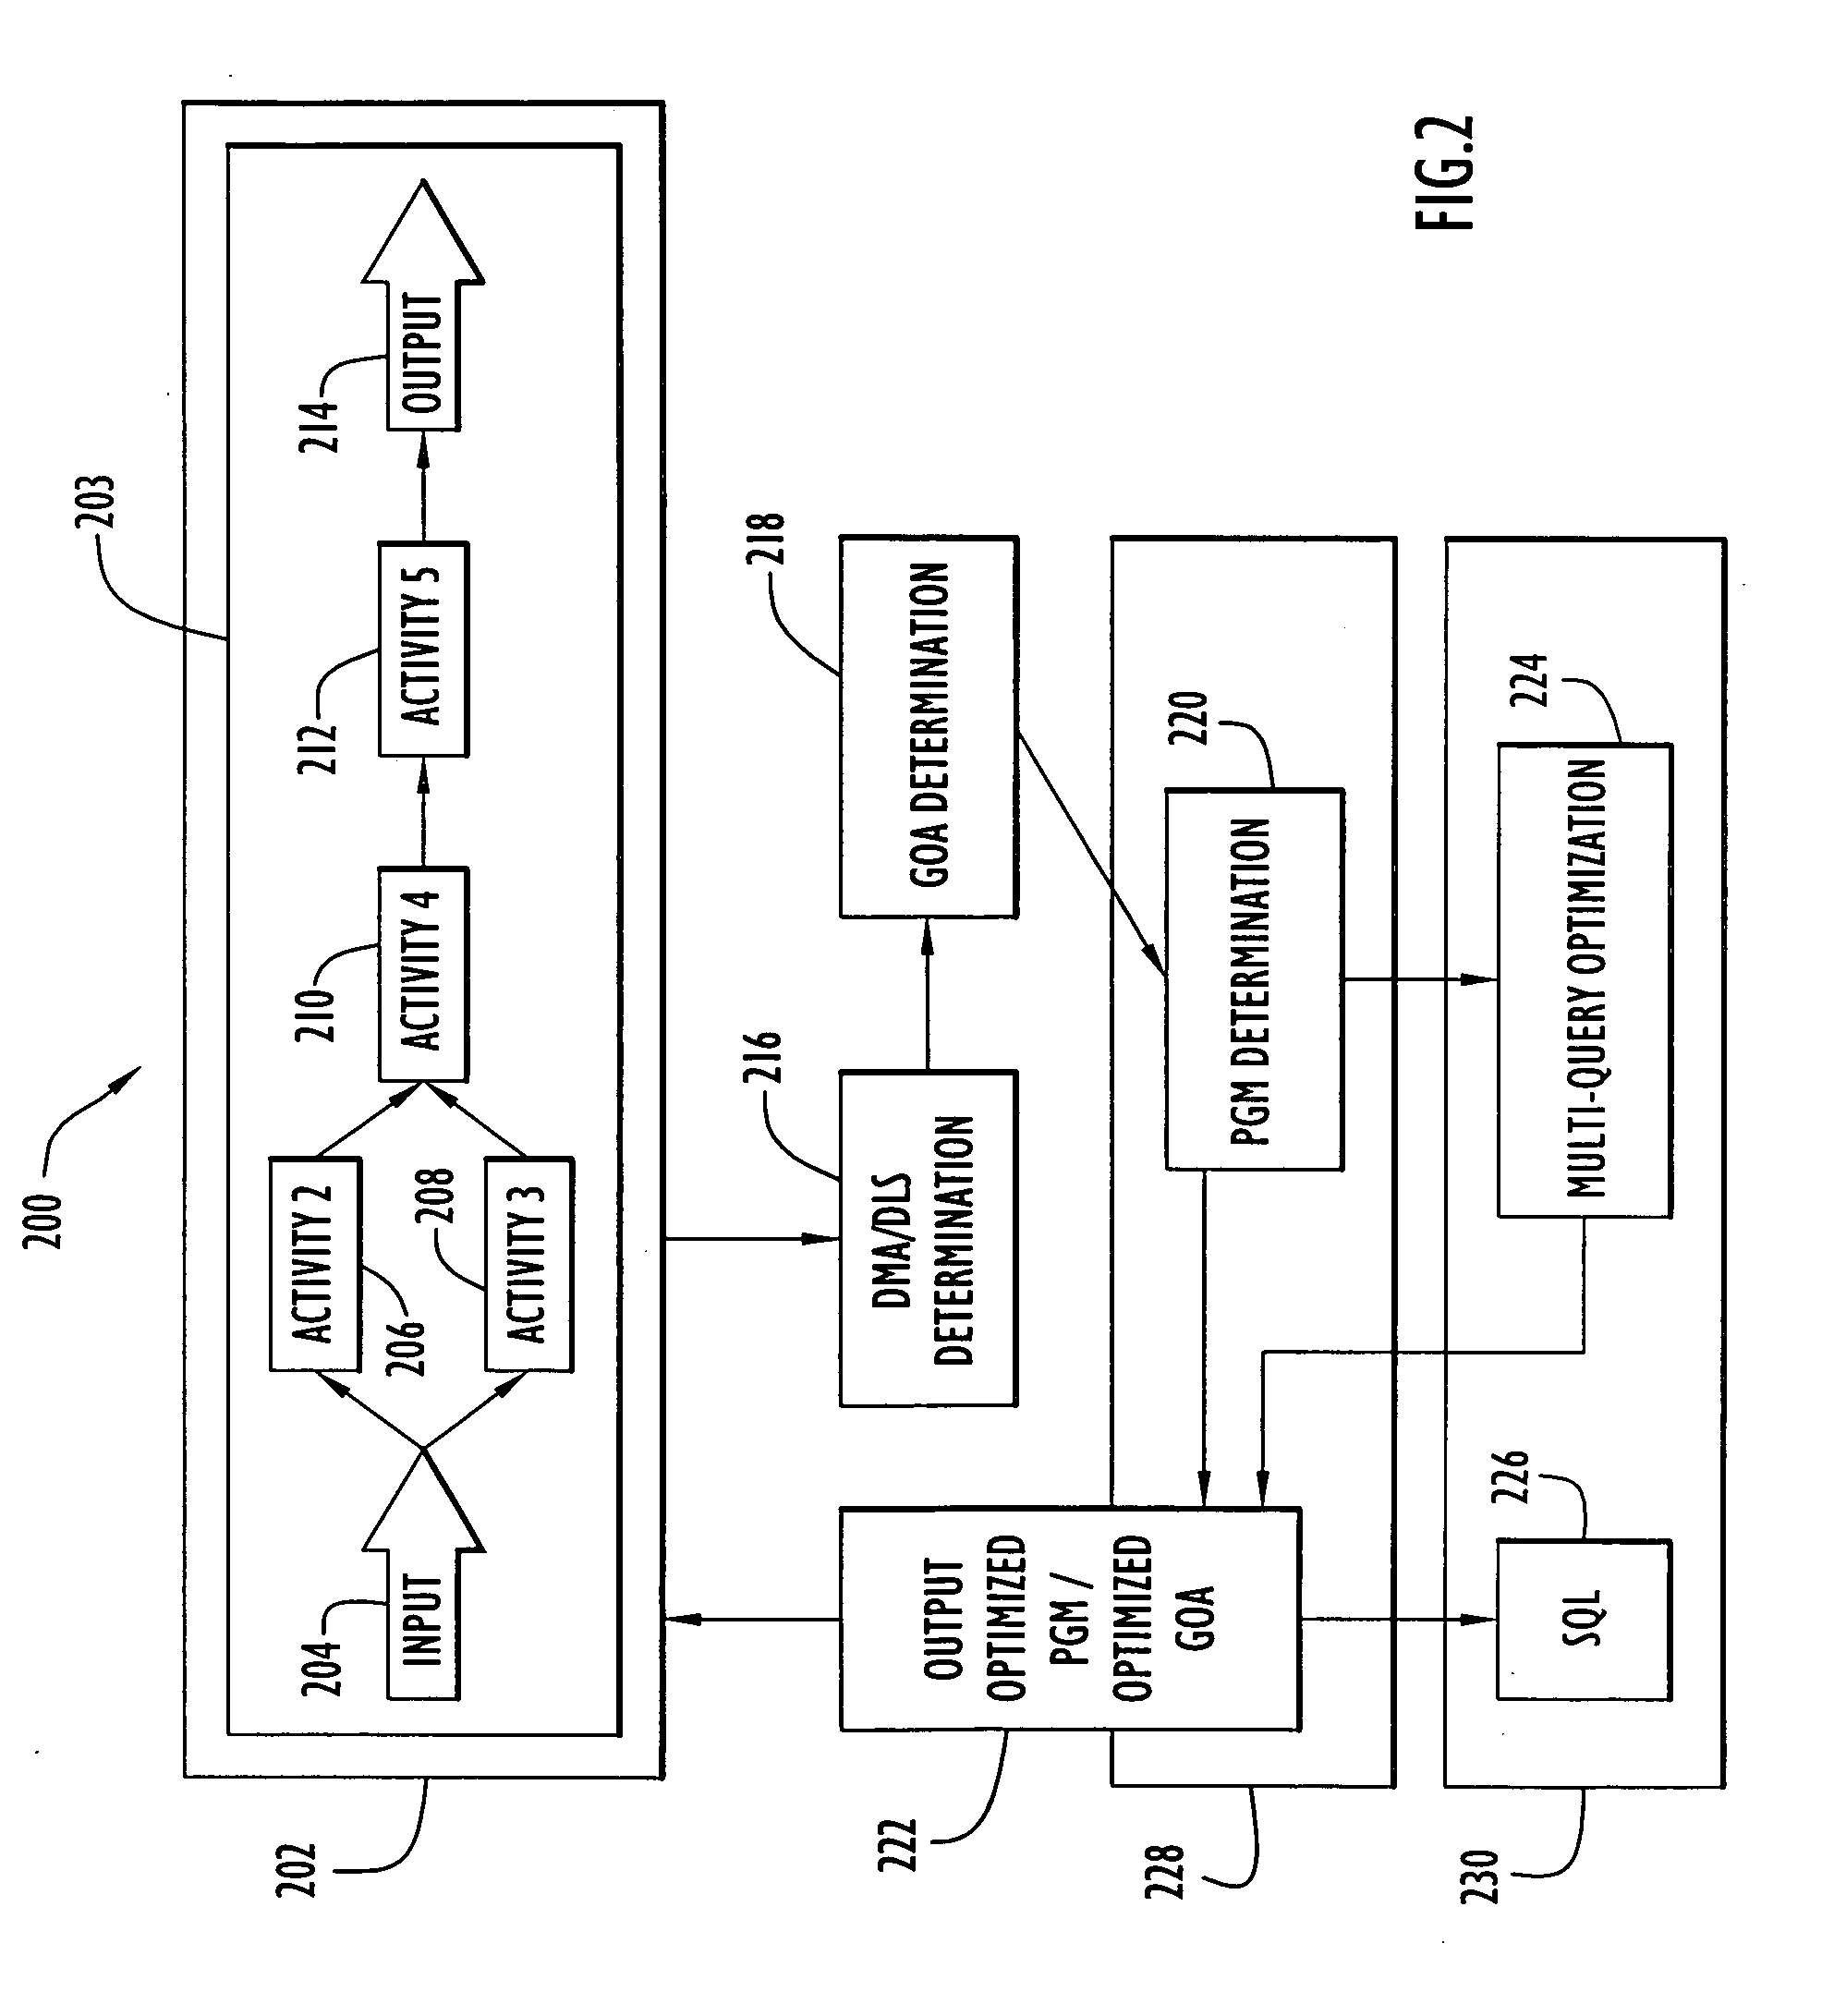 Method and apparatus for optimization in workflow management systems